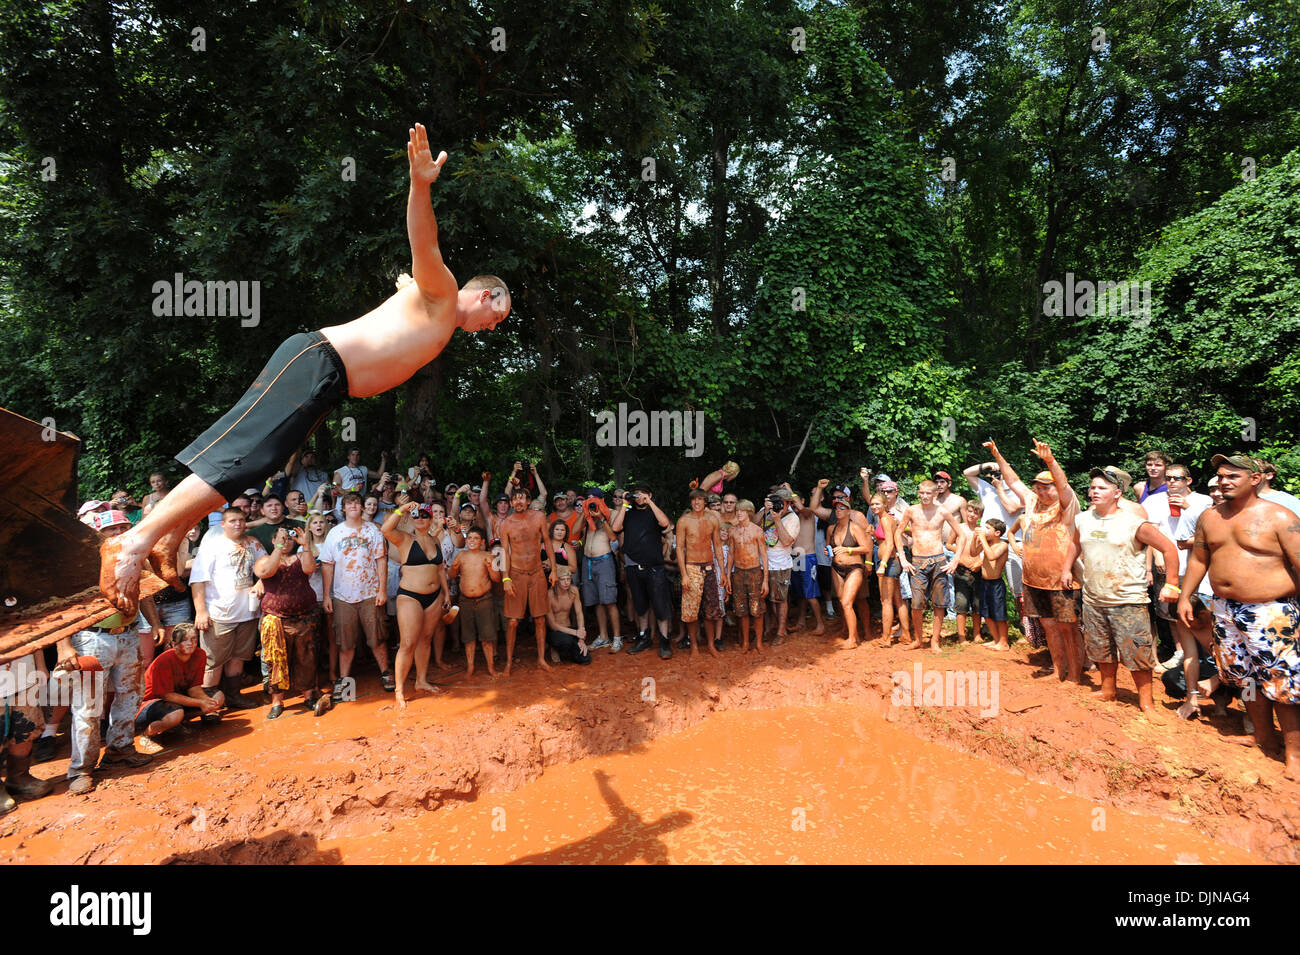 Mar 11, 2008 - East Dublin, Georgia, USA - Jeremiah Hatfield jumps in from a backhoe during the Mudpit Belly Flop event during the 13th annual Summer Redneck Games at Buckeye Park in East Dublin, Georgia, on Saturday. The annual homage to Southerners, began as a spoof to the 1996 Summer Olympics in Atlanta. Thousands of revelers attend the event whose events include bobbing for pig Stock Photo